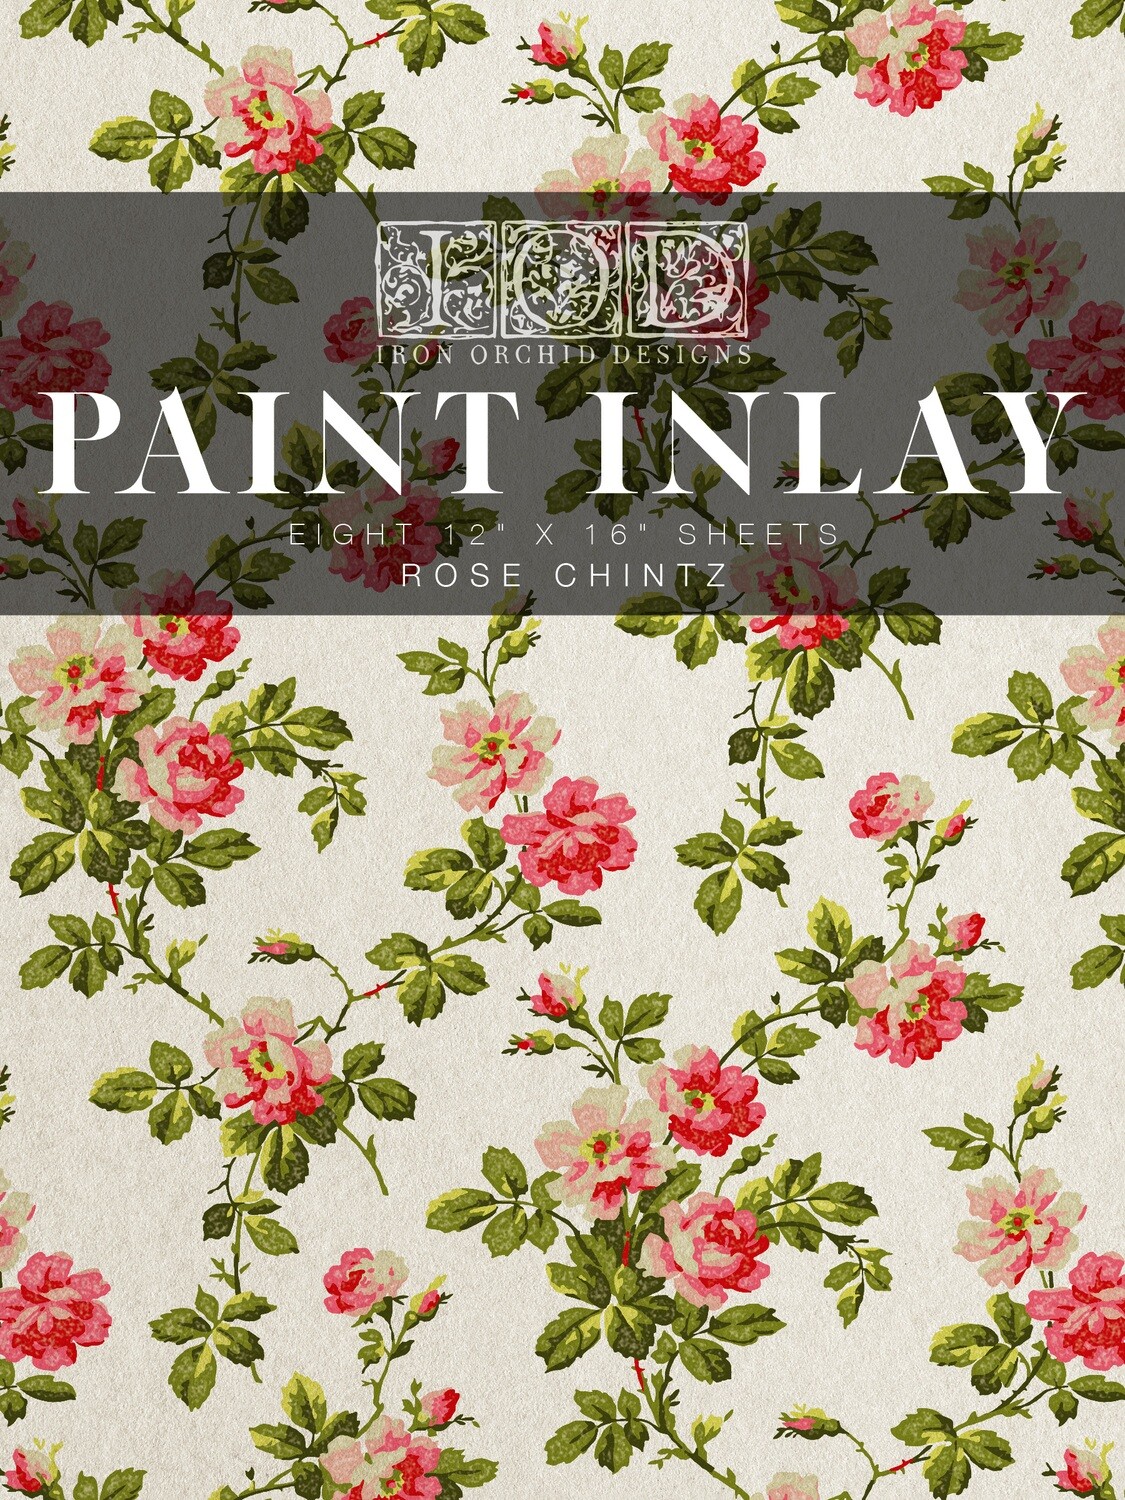 IOD ROSE CHINTZ PAINT INLAY Iron Orchid Designs